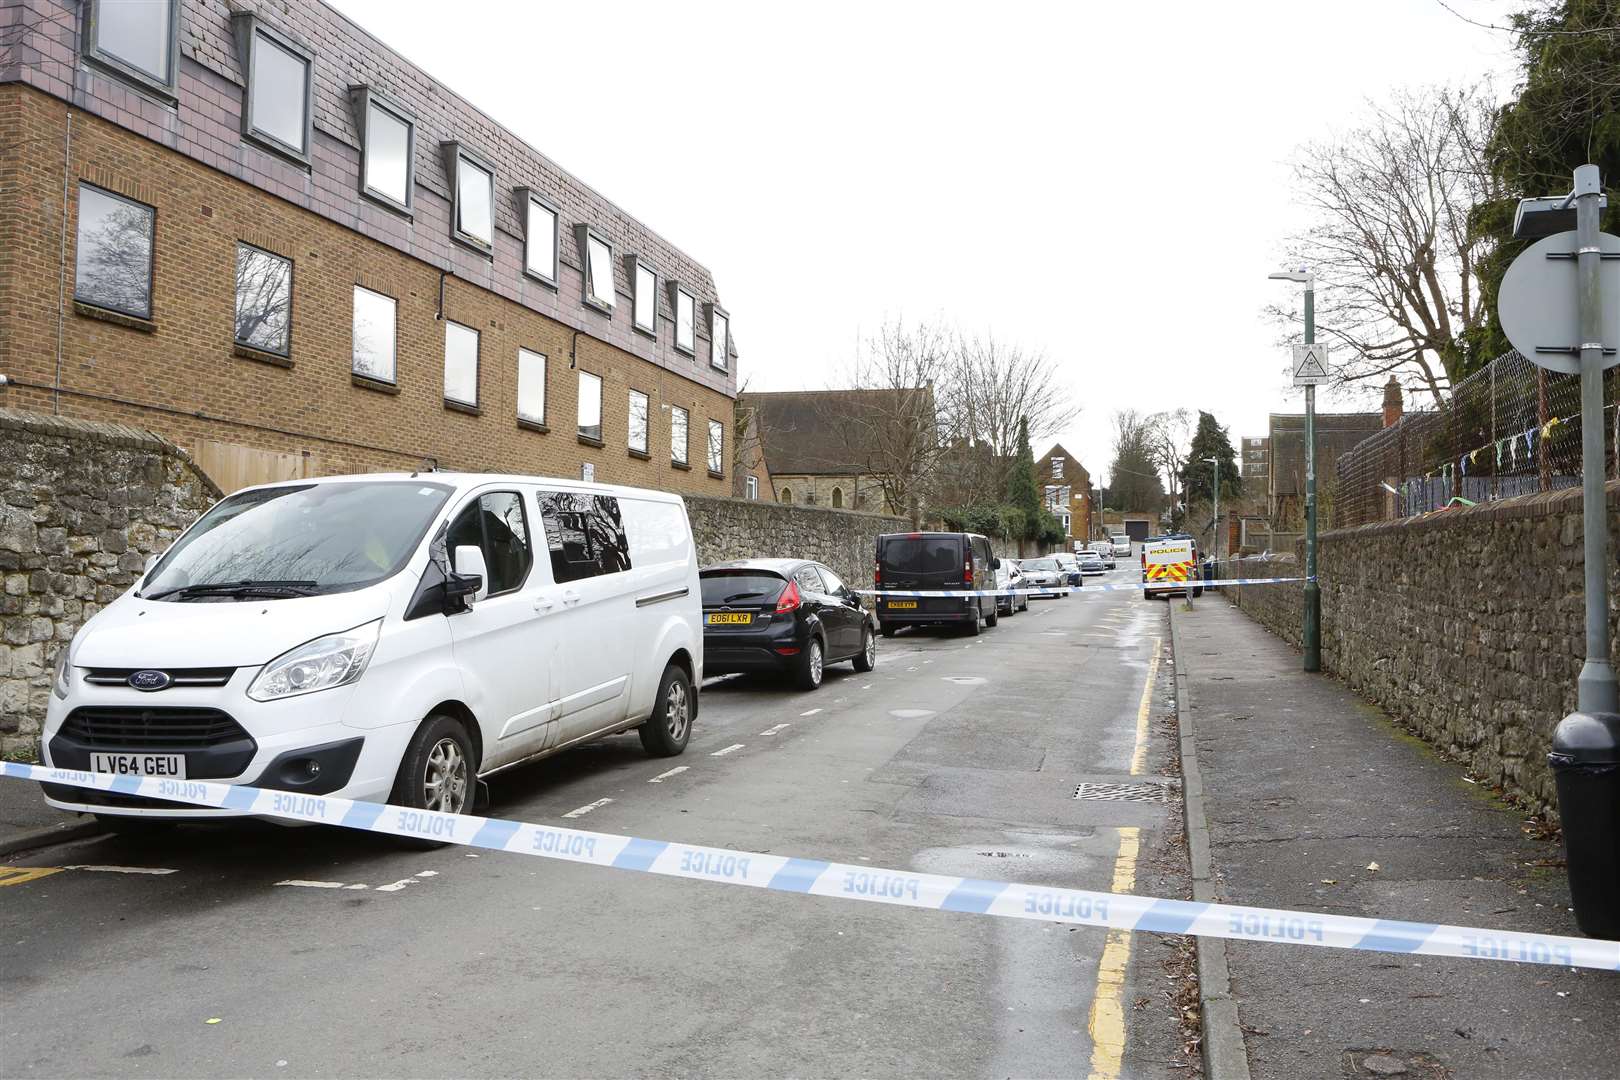 Priory Road has been cordoned off near Chaucer House, Knightrider Street, Maidstone. Picture: Andy Jones